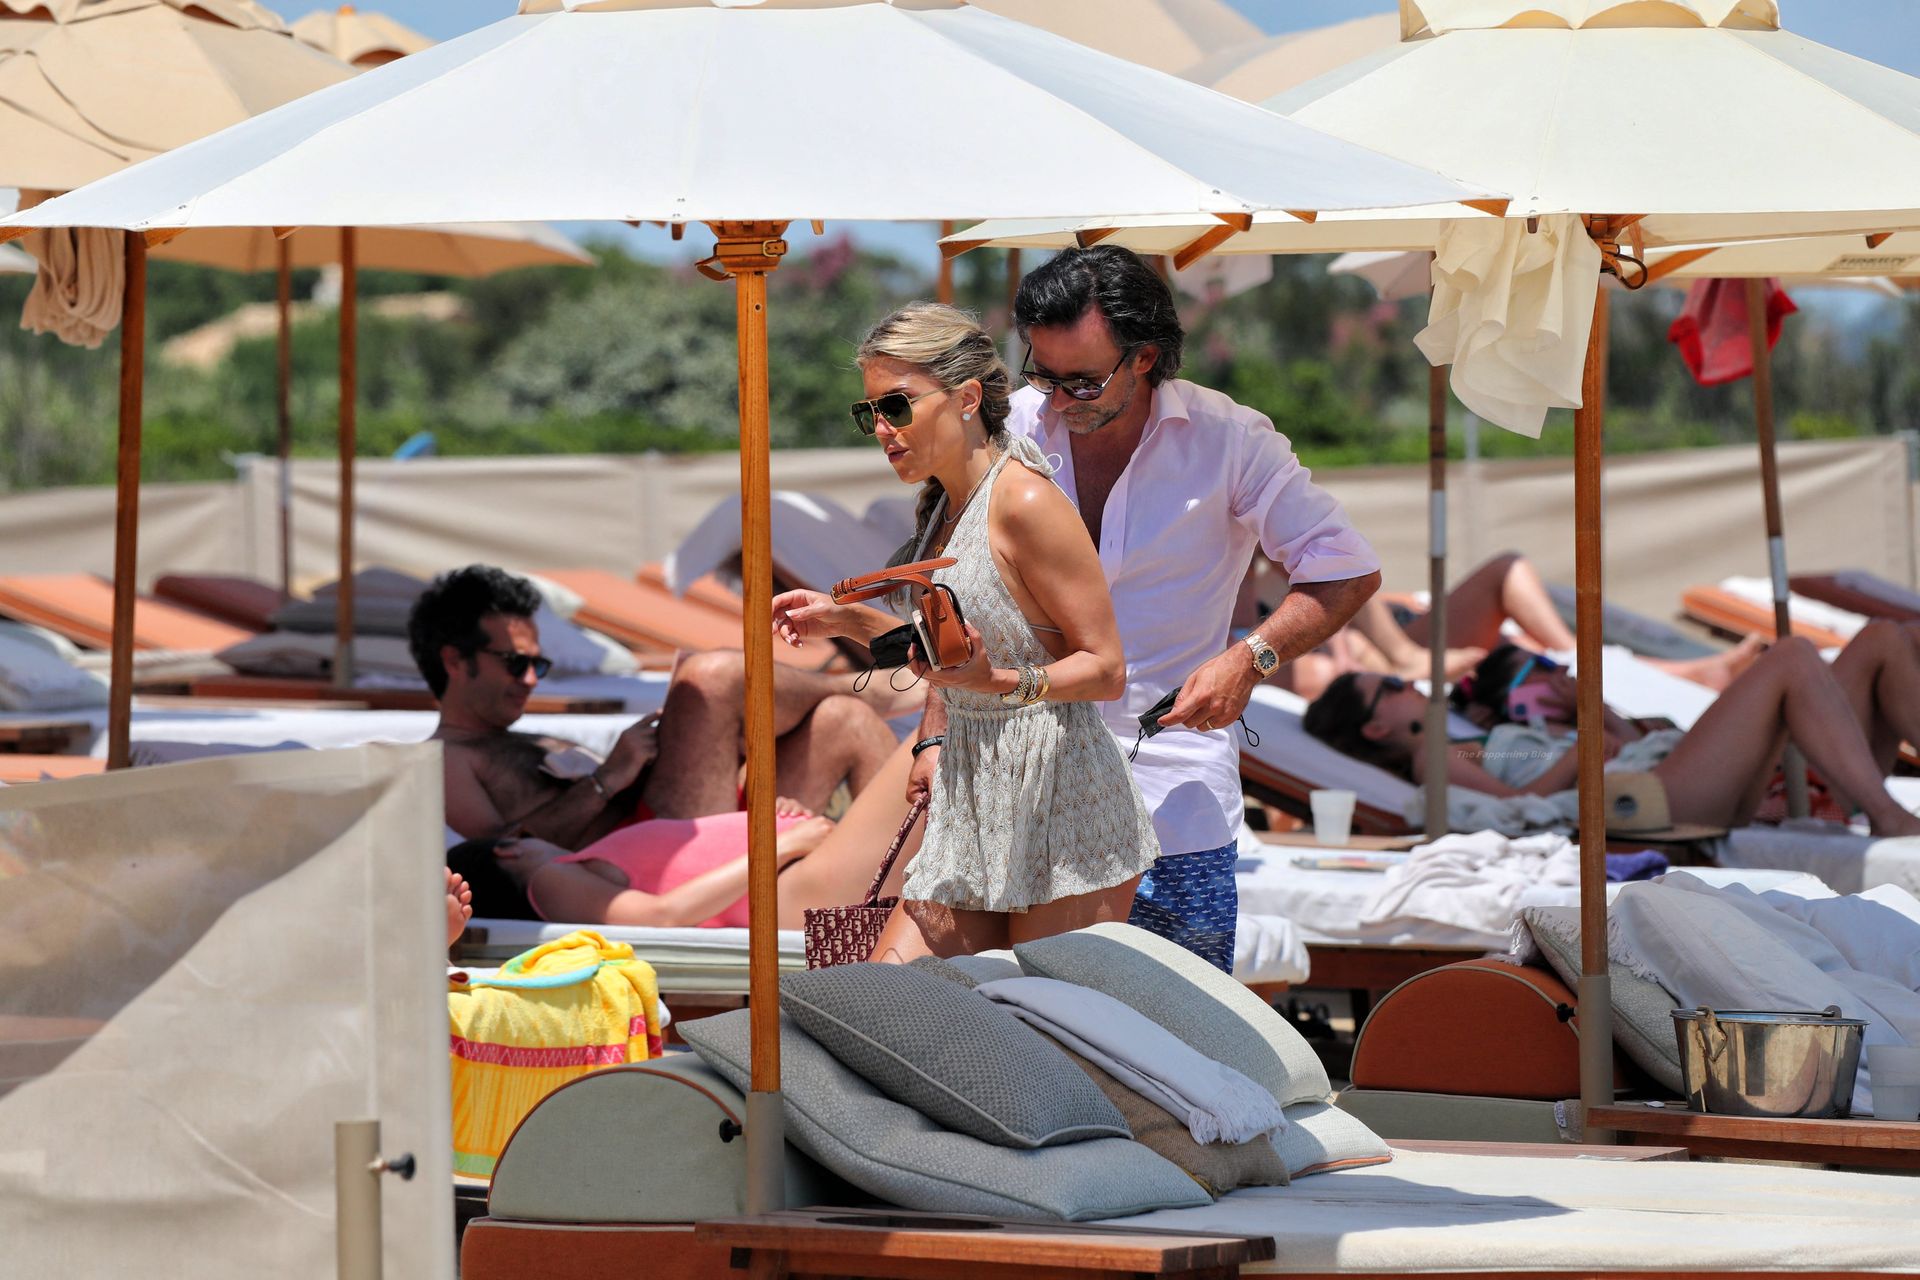 Sylvie Meis & Niclas Castello are Spotted at The Beach in Saint Tropez (8 Photos)